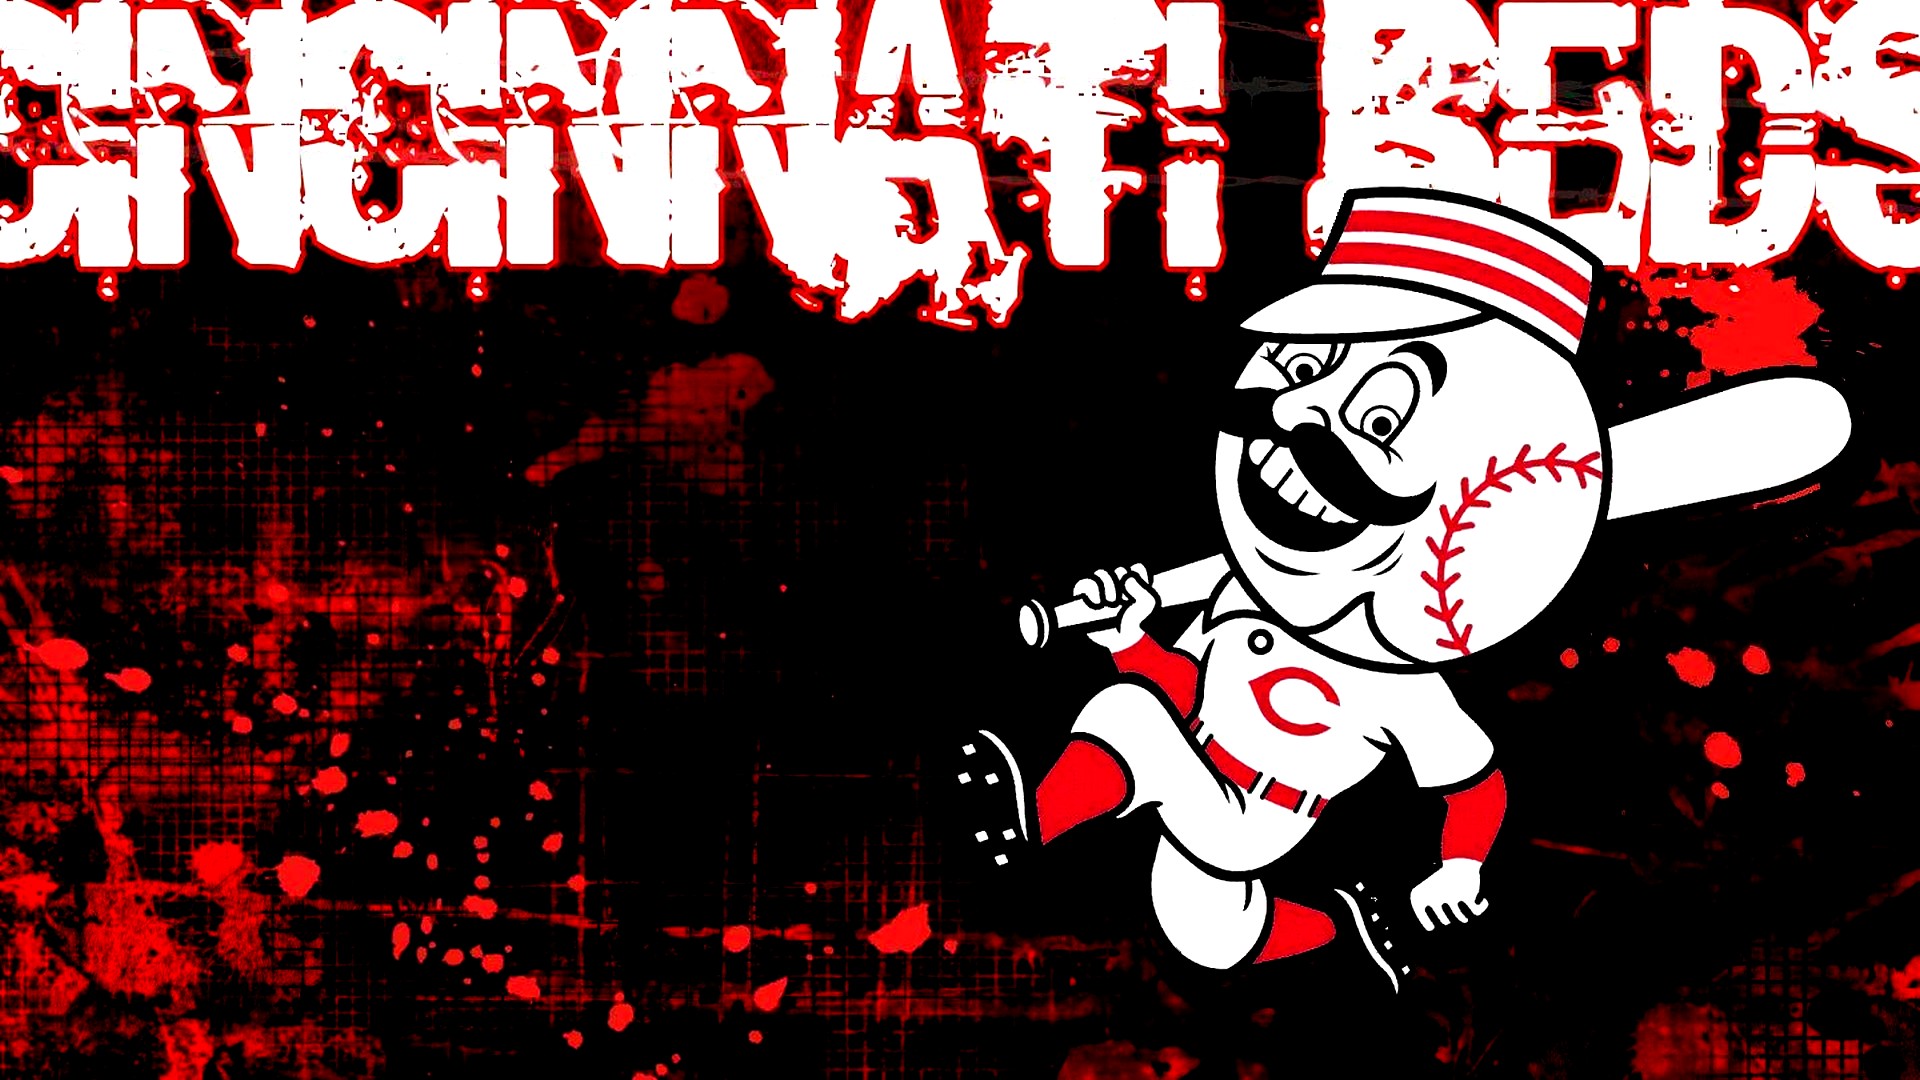 Wallpaper Desktop Cincinnati Reds MLB HD With high-resolution 1920X1080 pixel. You can use this wallpaper for Mac Desktop Wallpaper, Laptop Screensavers, Android Wallpapers, Tablet or iPhone Home Screen and another mobile phone device